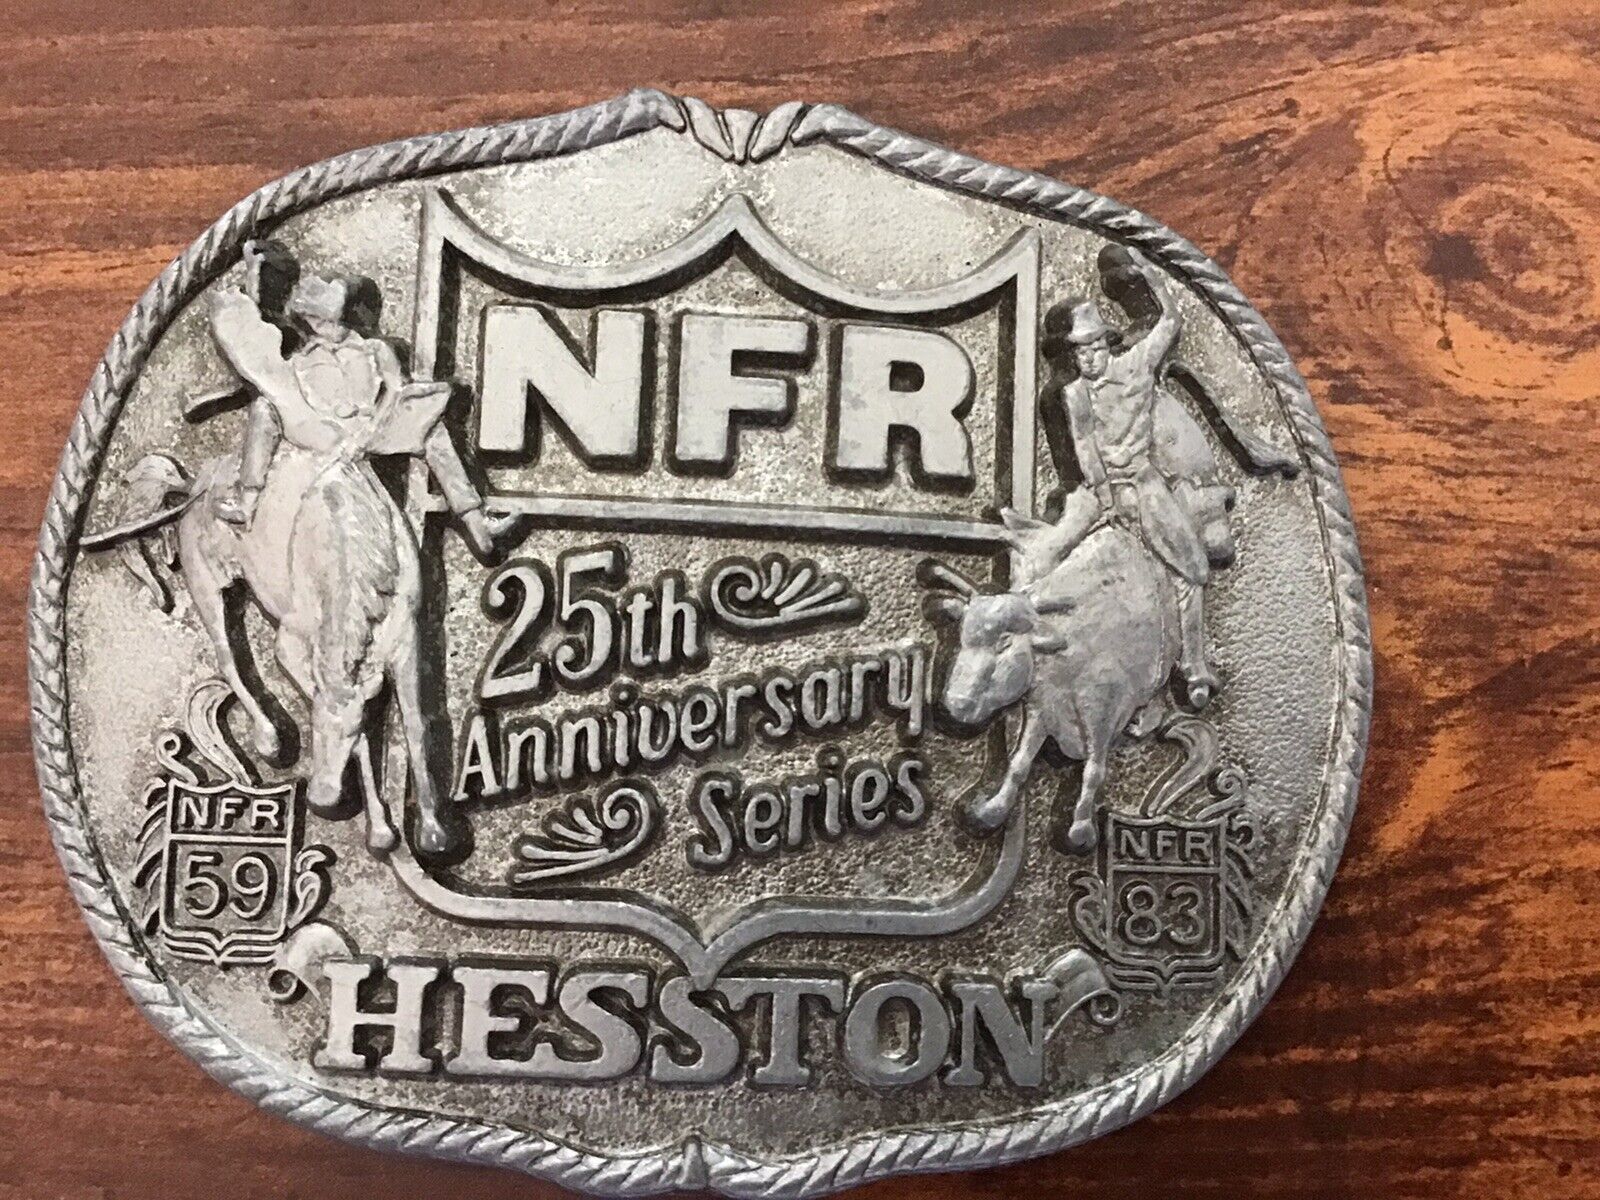 NFR 25th Anniversity Series Hesston First Edition Belt Buckle